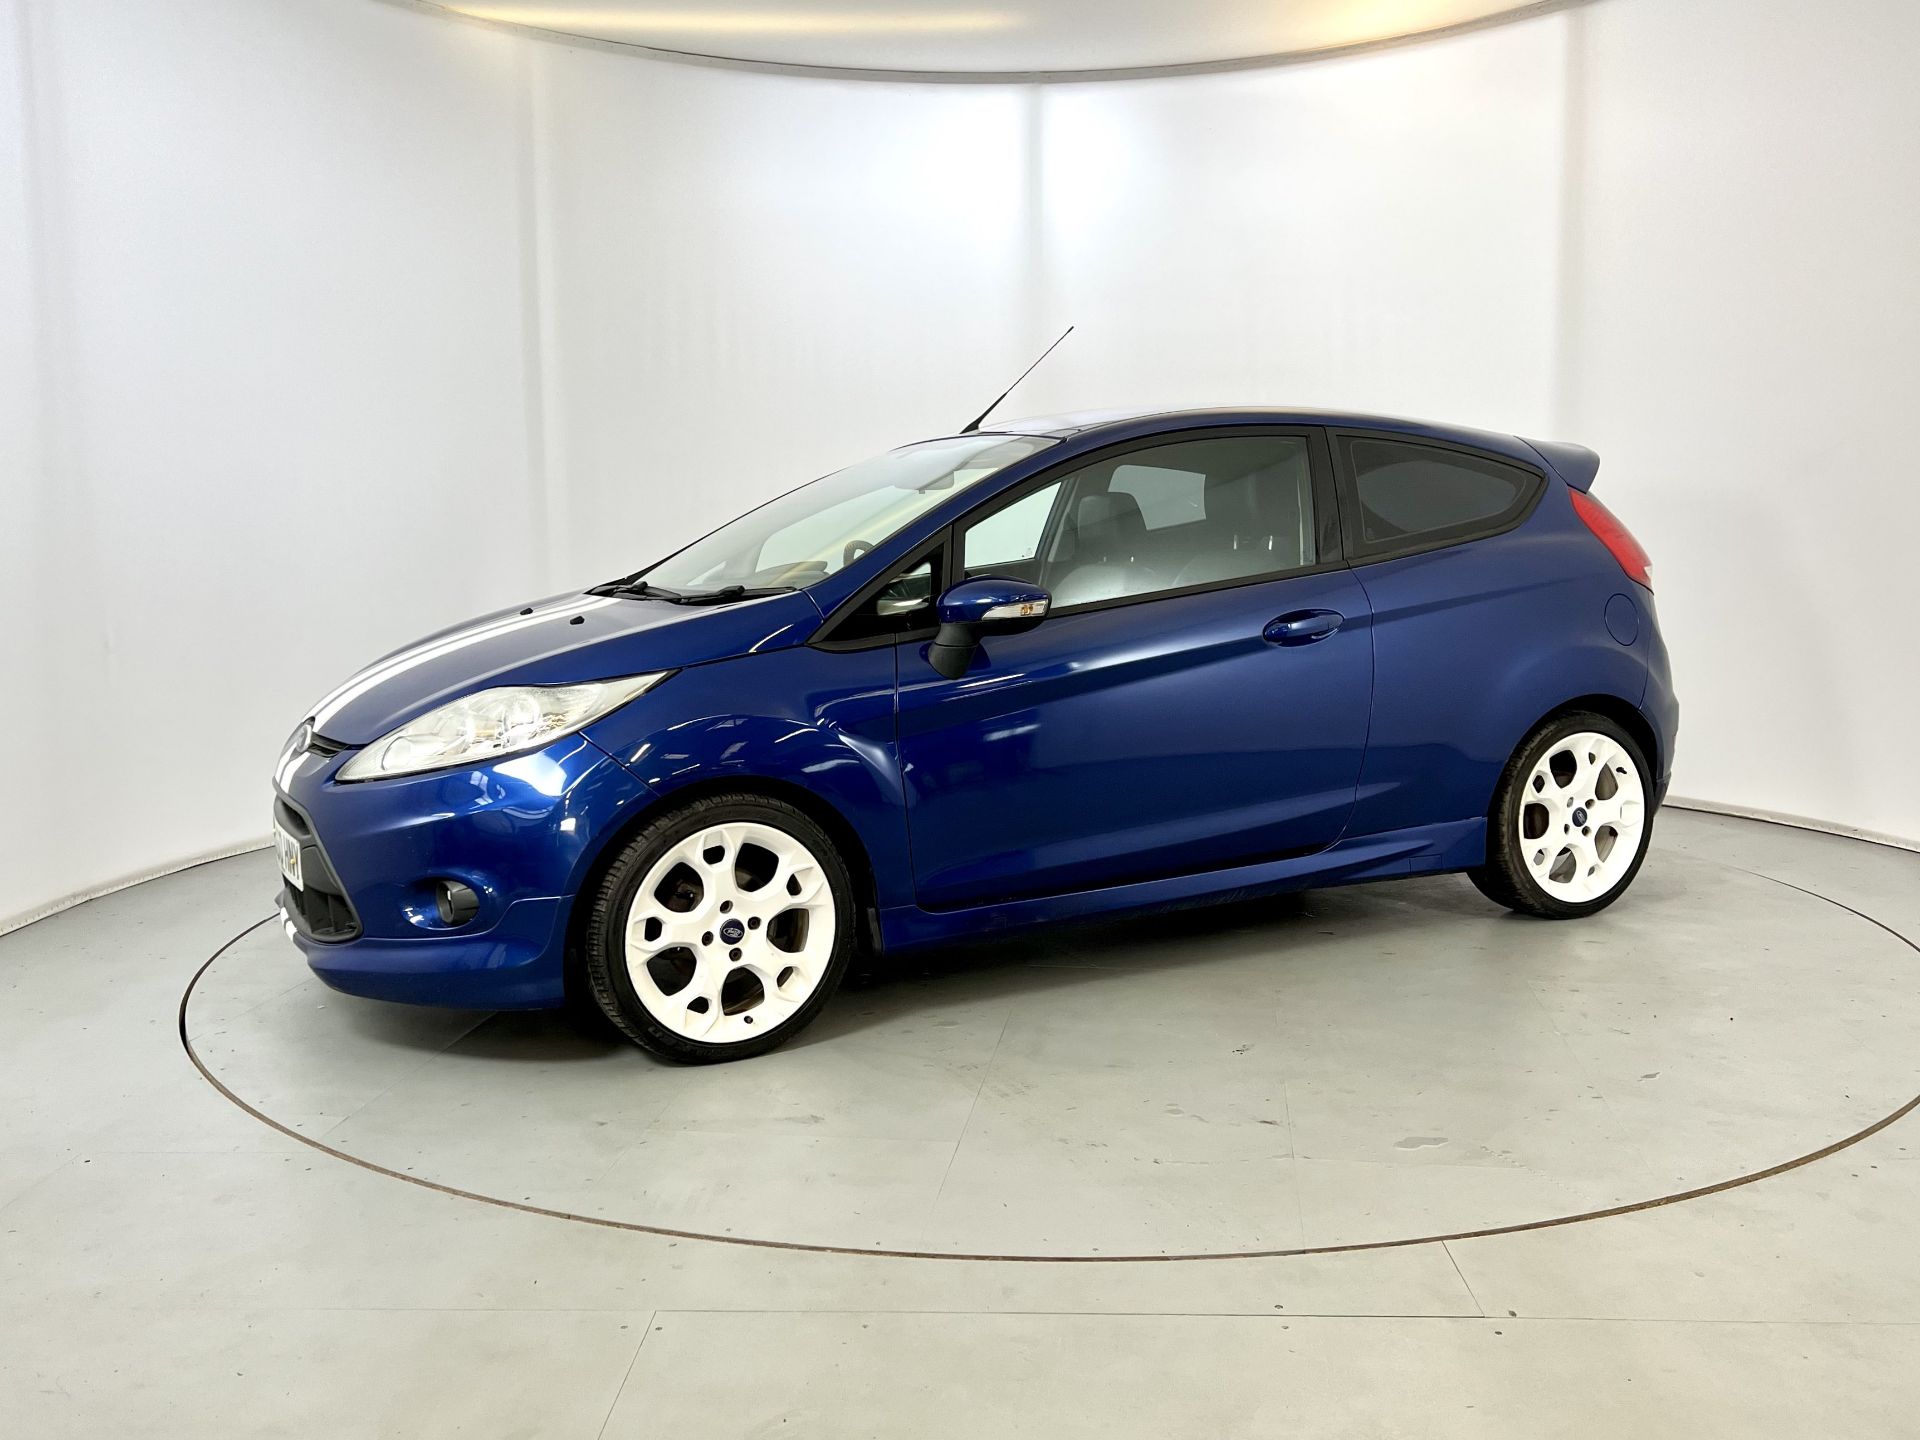 Ford Fiesta S1600 - Image 4 of 30